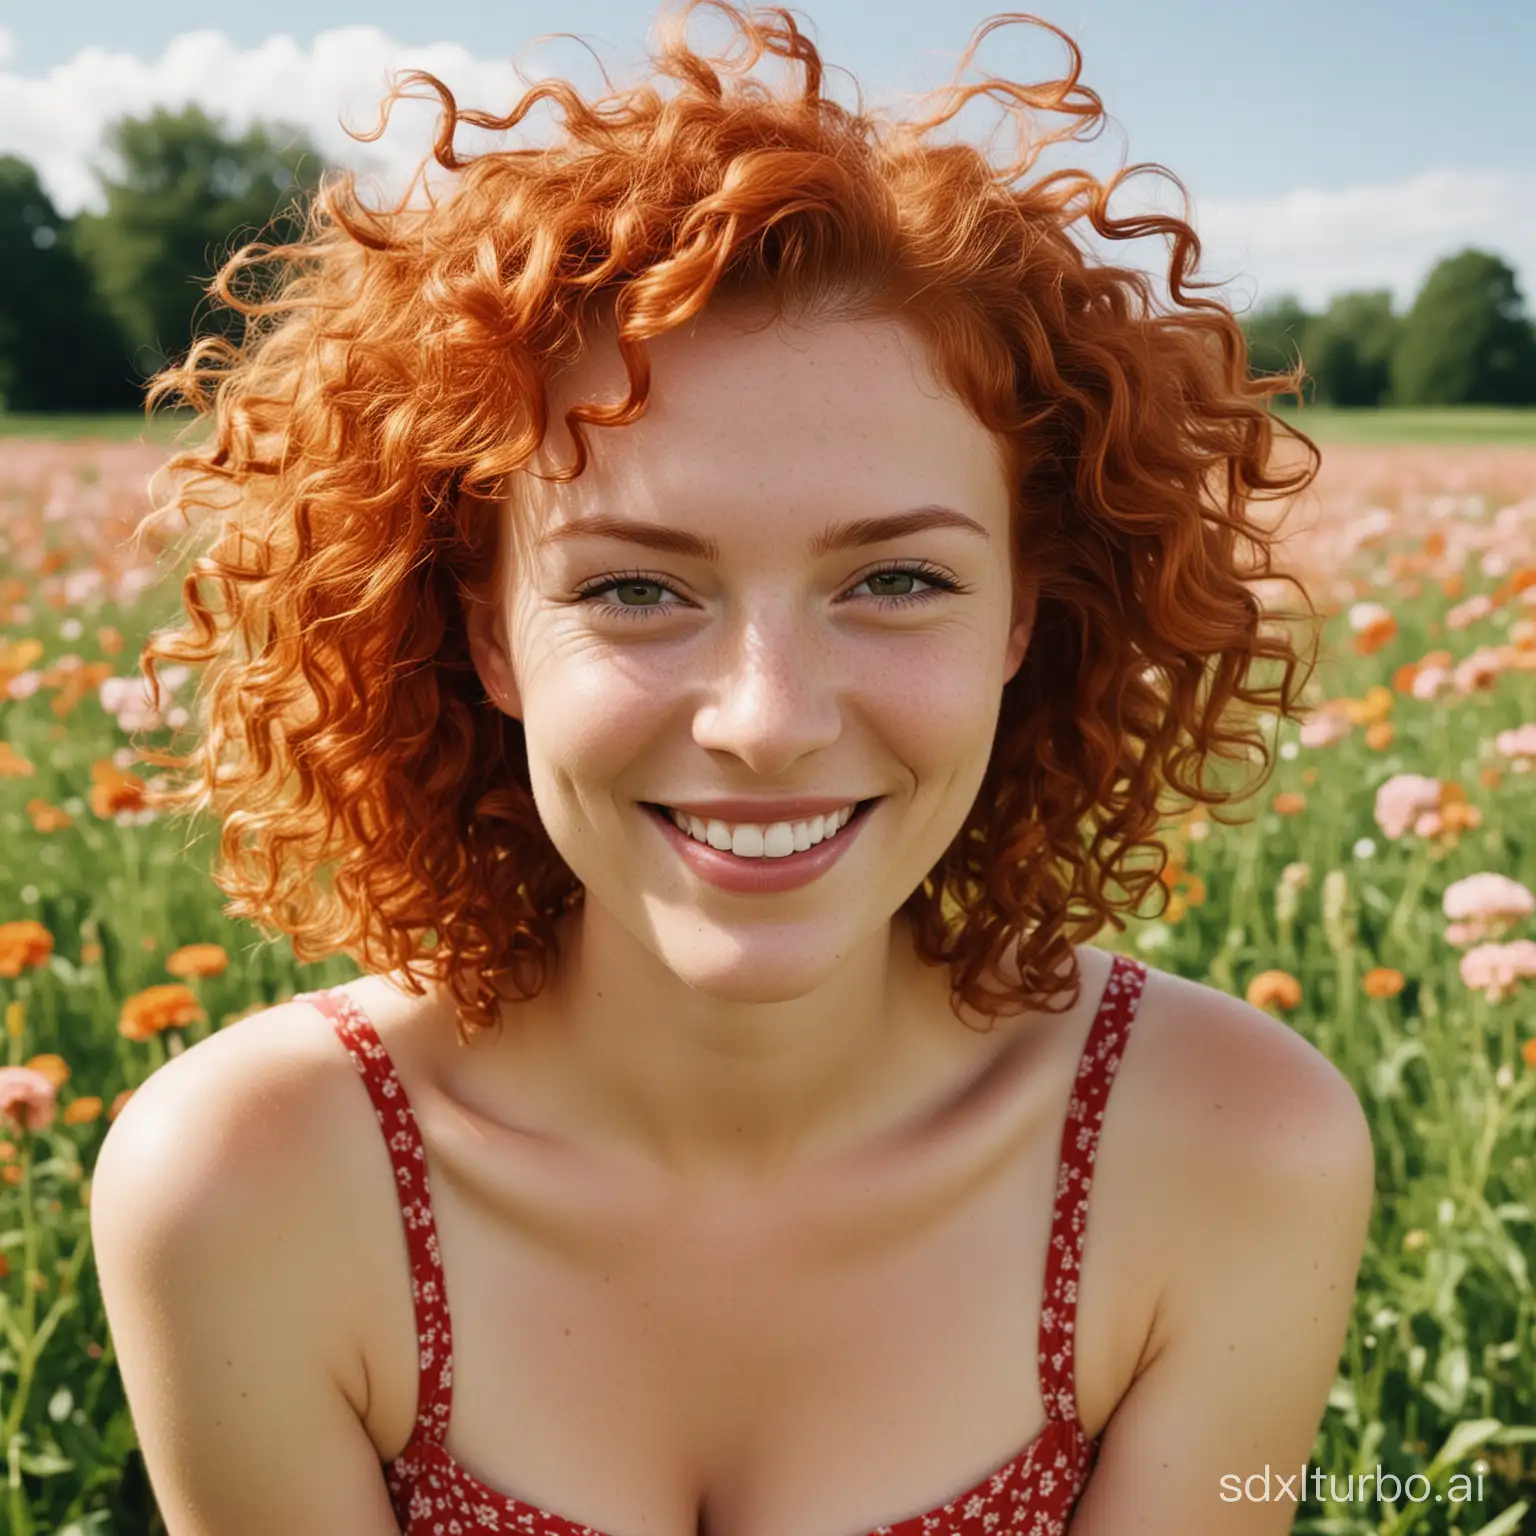 Woman-with-Red-Curly-Hair-Smiling-in-Flower-Field-Portrait